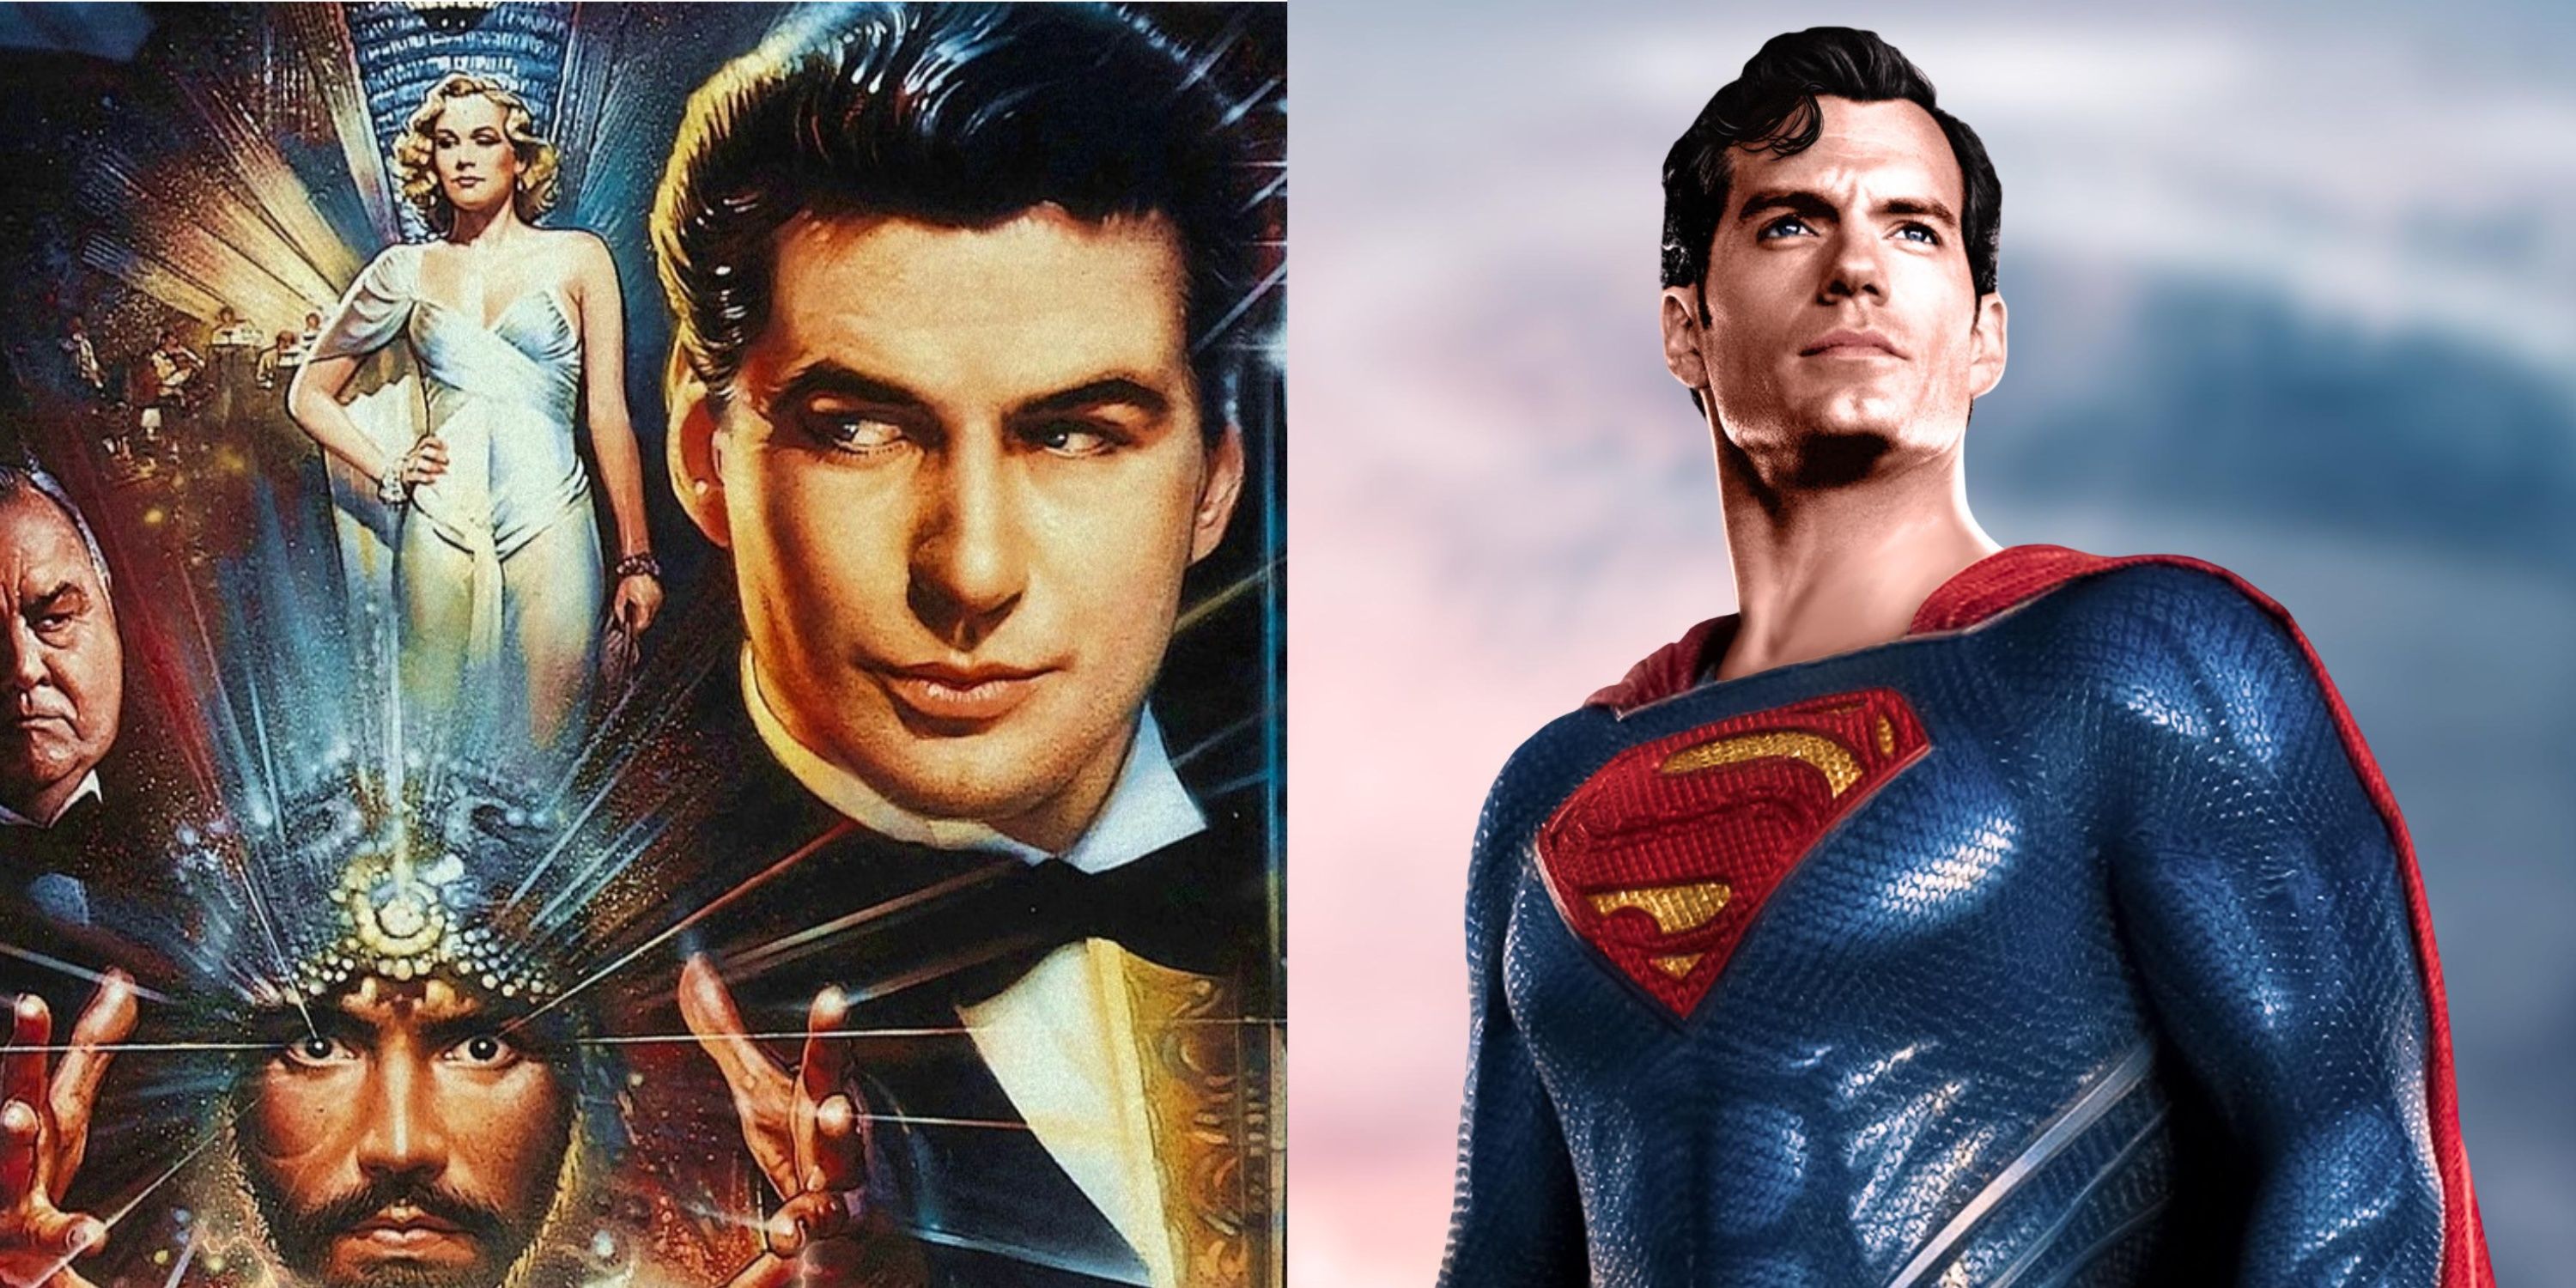 Split image of The Shadow and Henry Cavill as Superman.